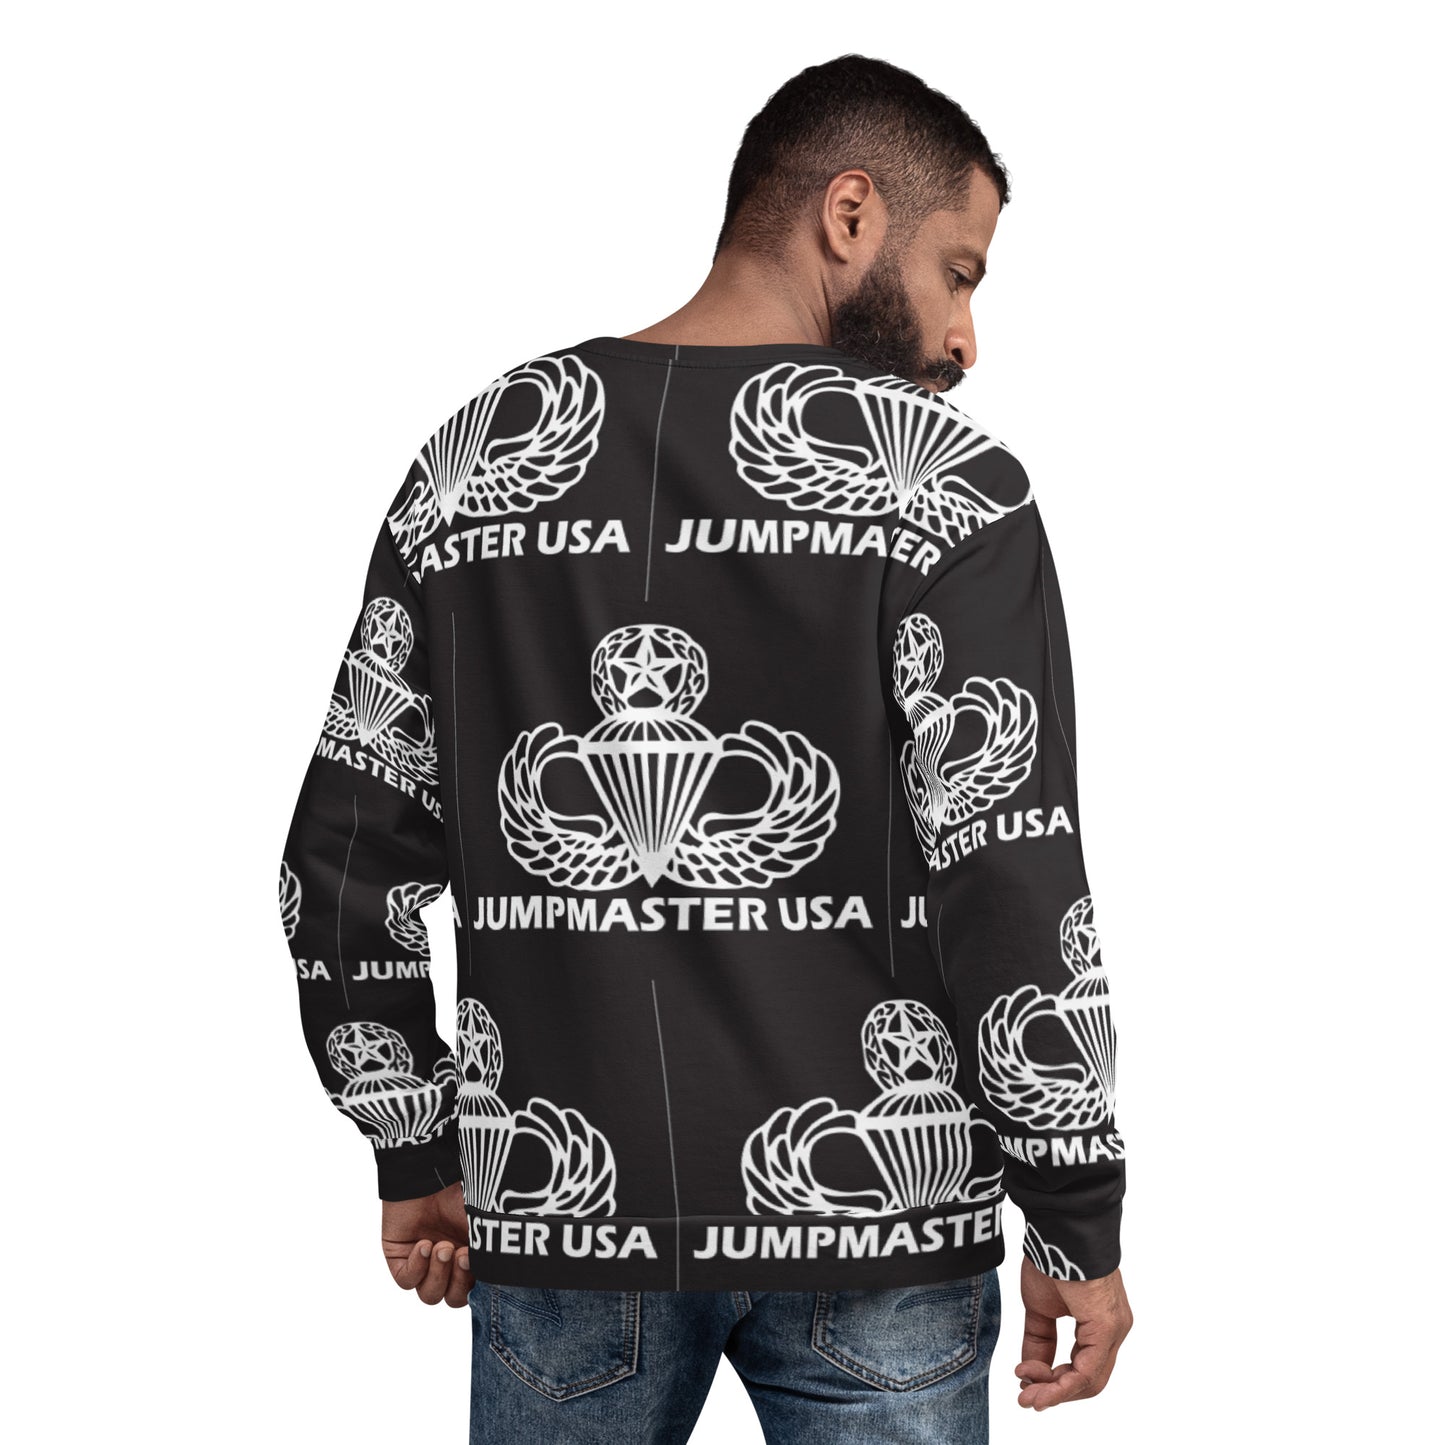 This Jumpmaster USA sweatshirt is unique and will grab all the attention at your unit BBQ or mandatory fun activity. These all-over printed sweatshirts are precision-cut and hand-sewn to achieve the best possible look and bring out the intricate design.